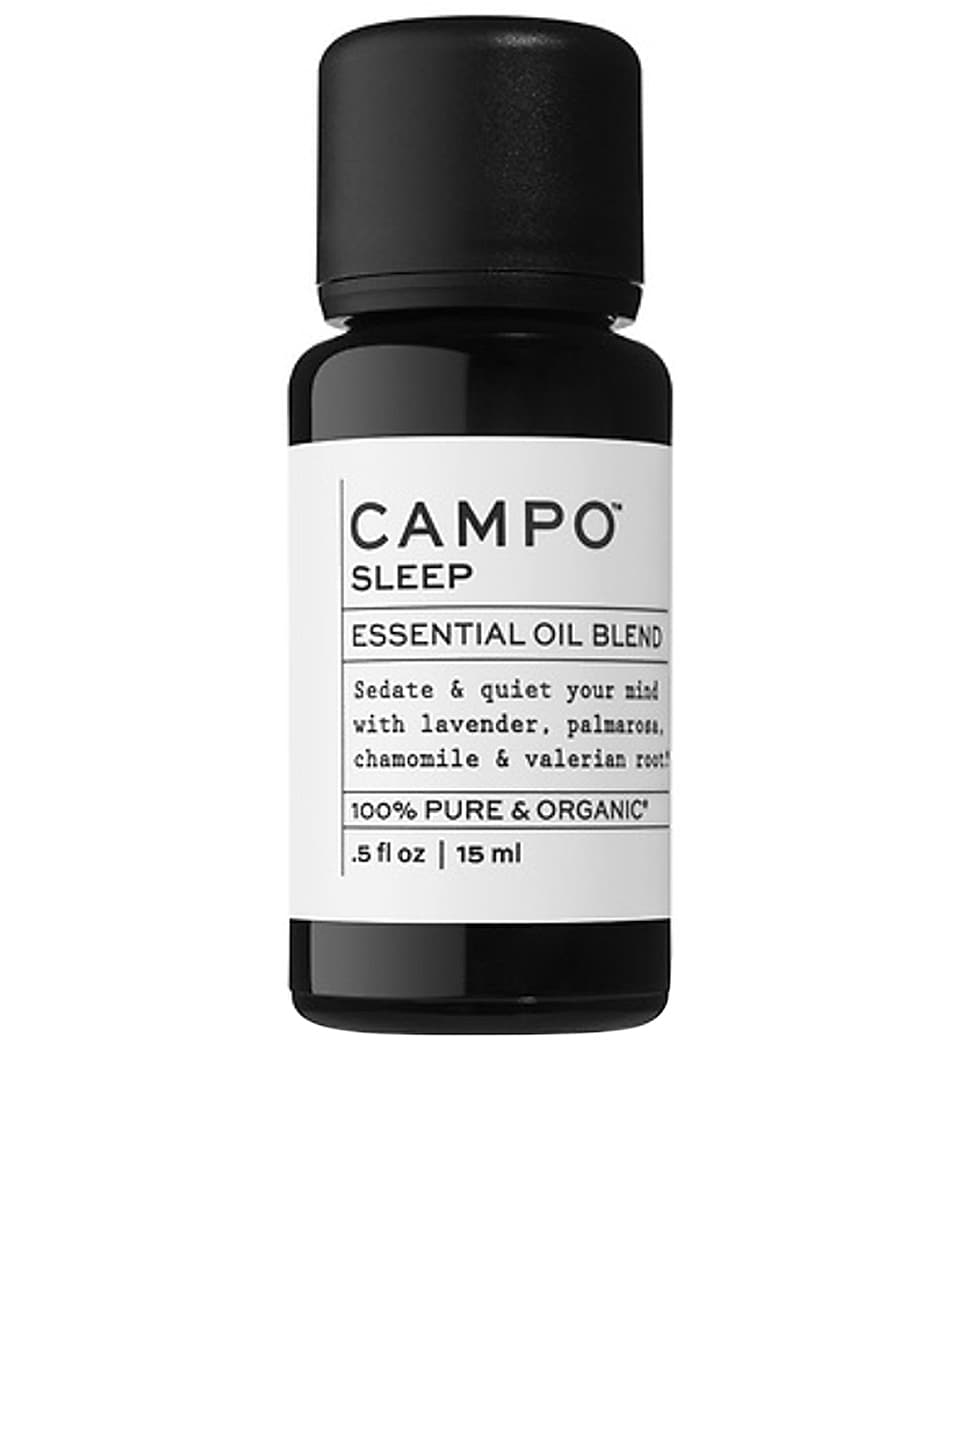 CAMPO Sleep Blend 100% Pure Essential Oil Blend 